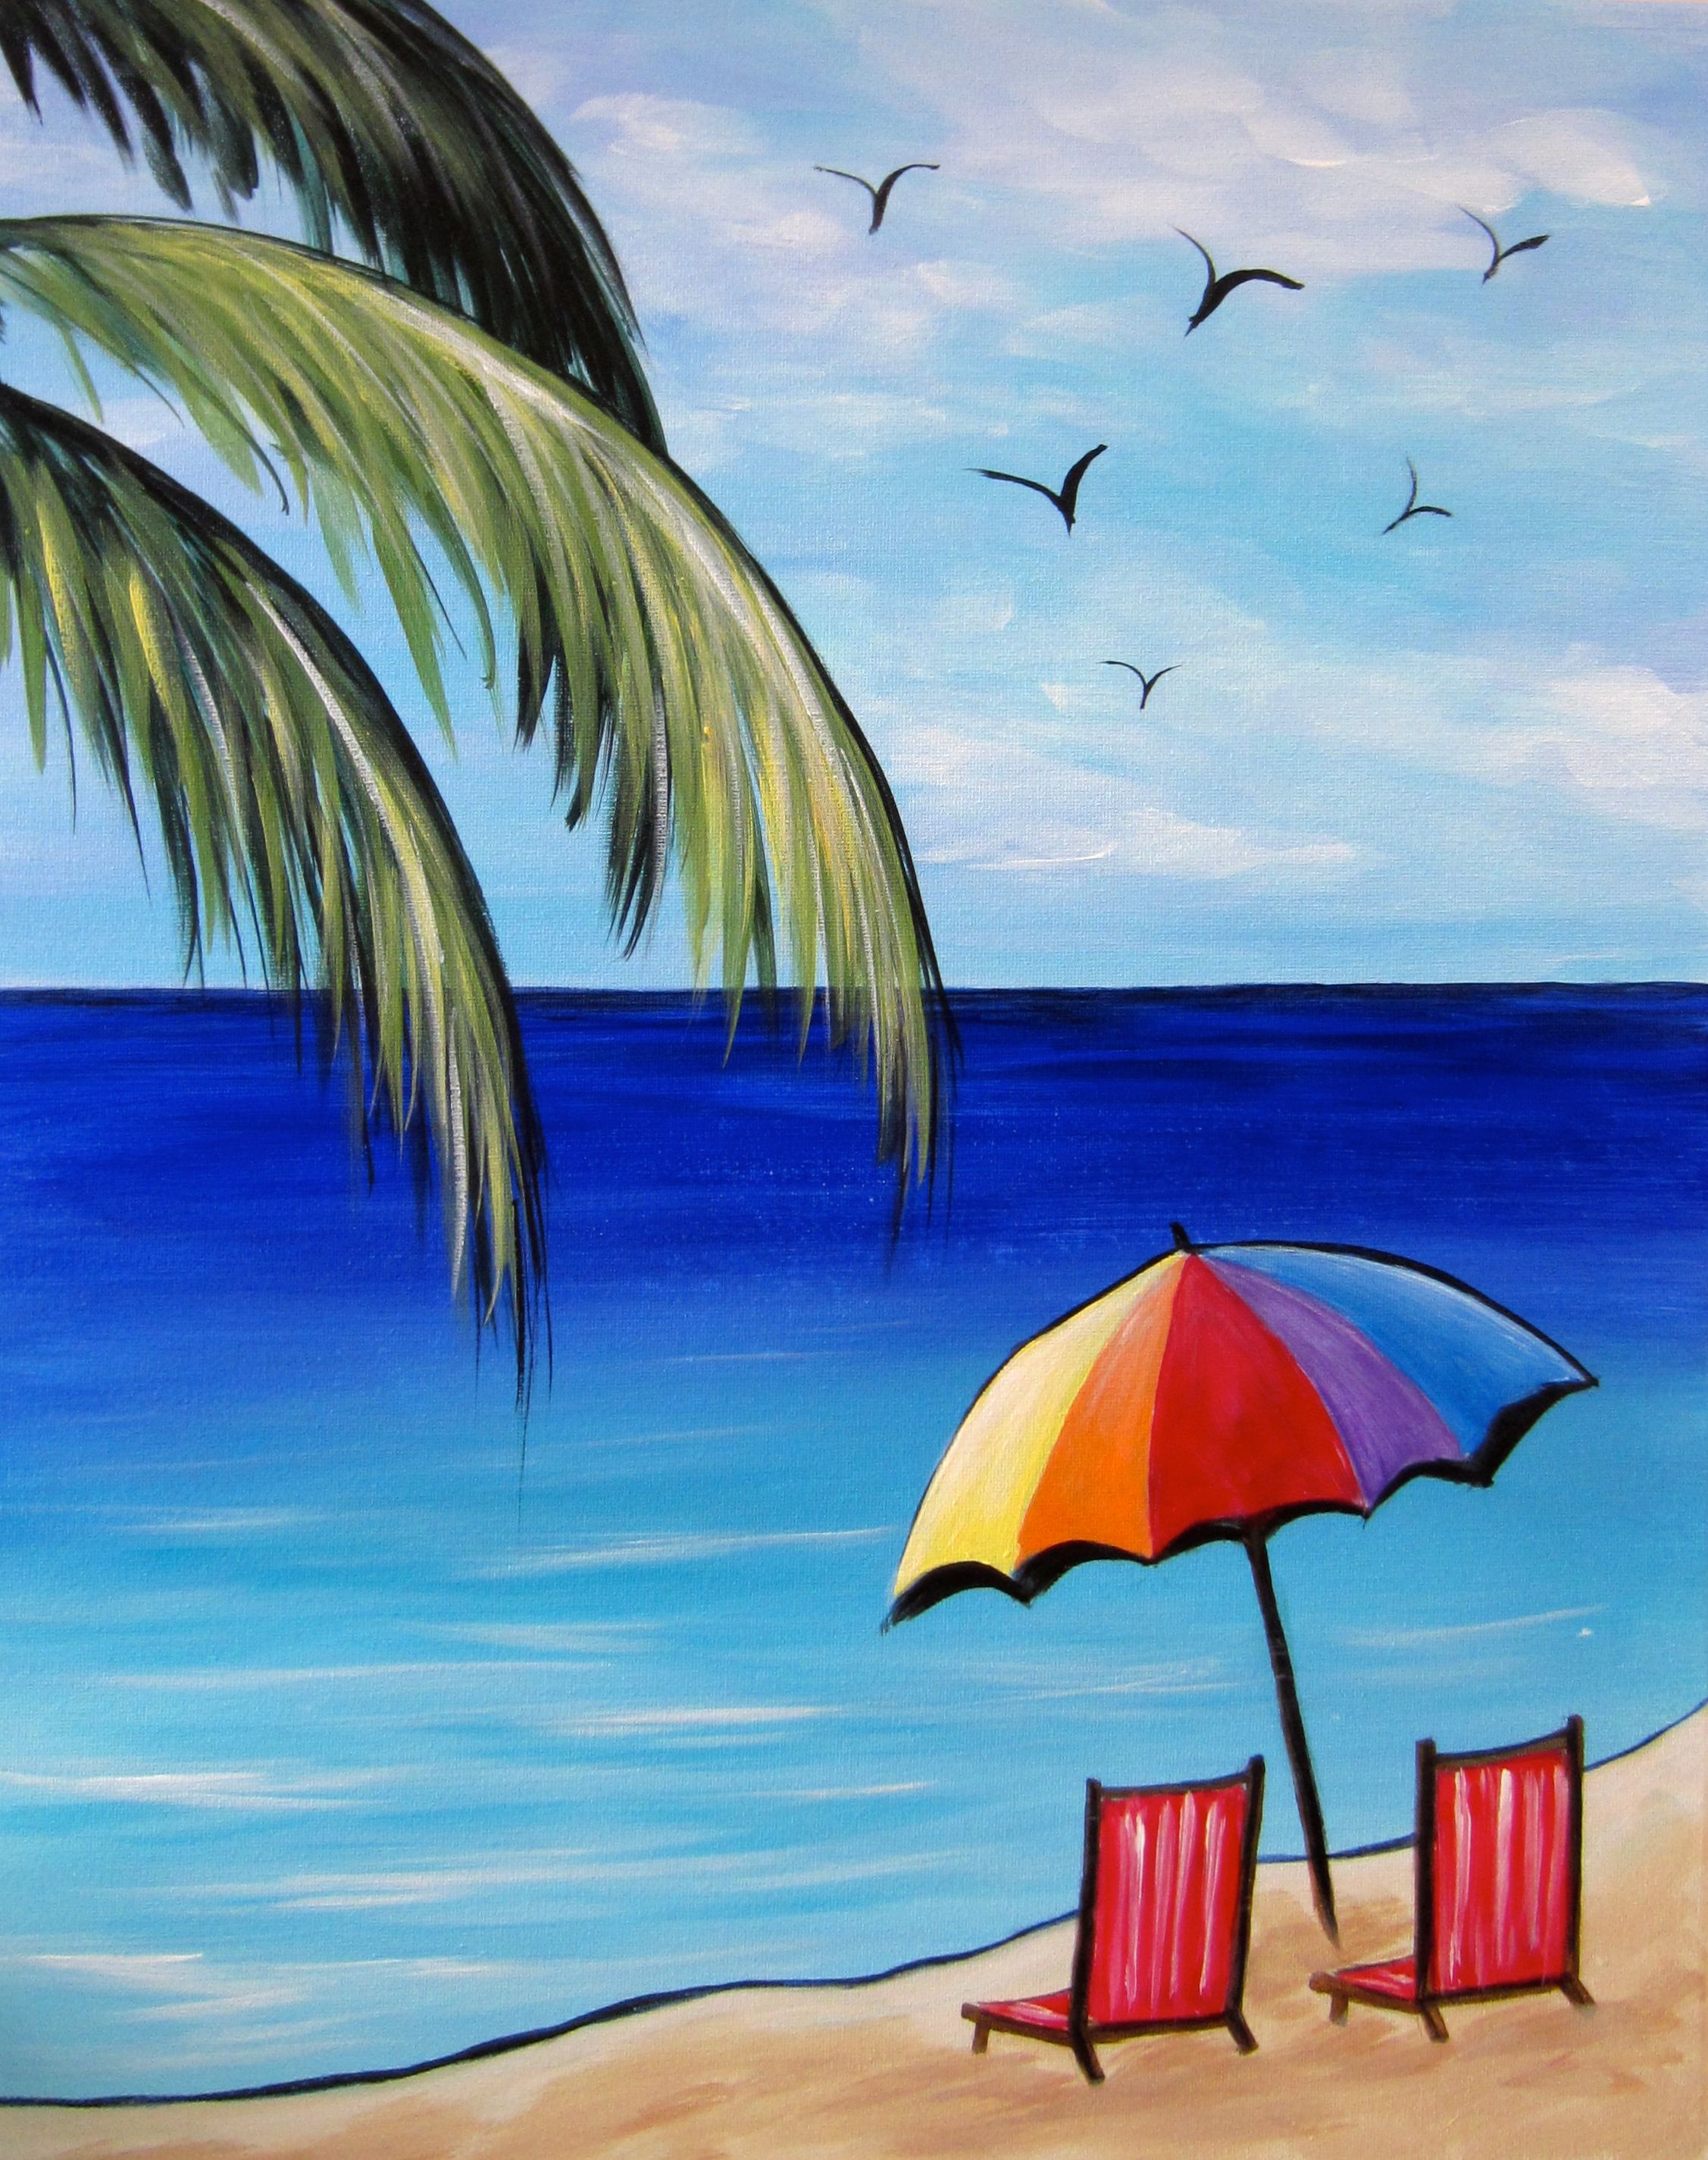 Beach Drawing Ideas at GetDrawings.com | Free for personal use Beach ...